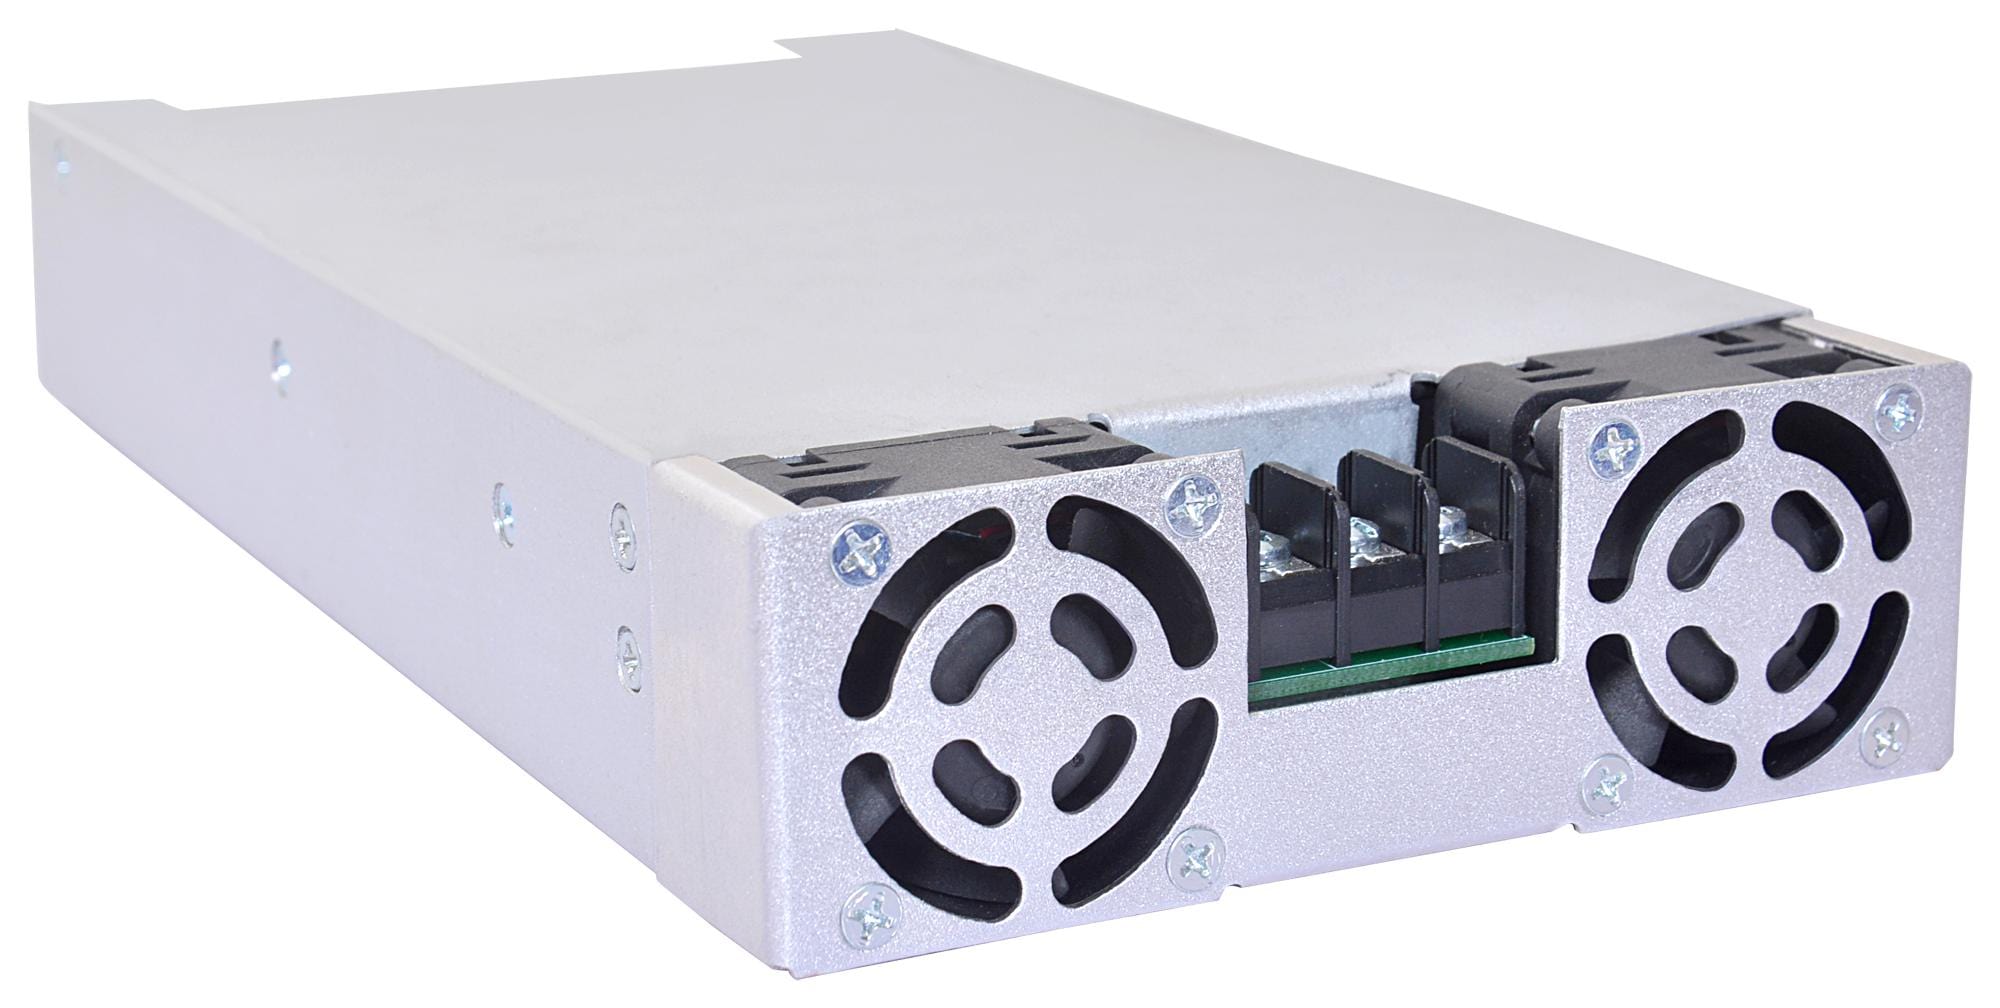 BEL POWER SOLUTIONS Enclosed - Single Output ABE1000-1T24 POWER SUPPLY, AC-DC, 24V, 41.66A BEL POWER SOLUTIONS 2984786 ABE1000-1T24